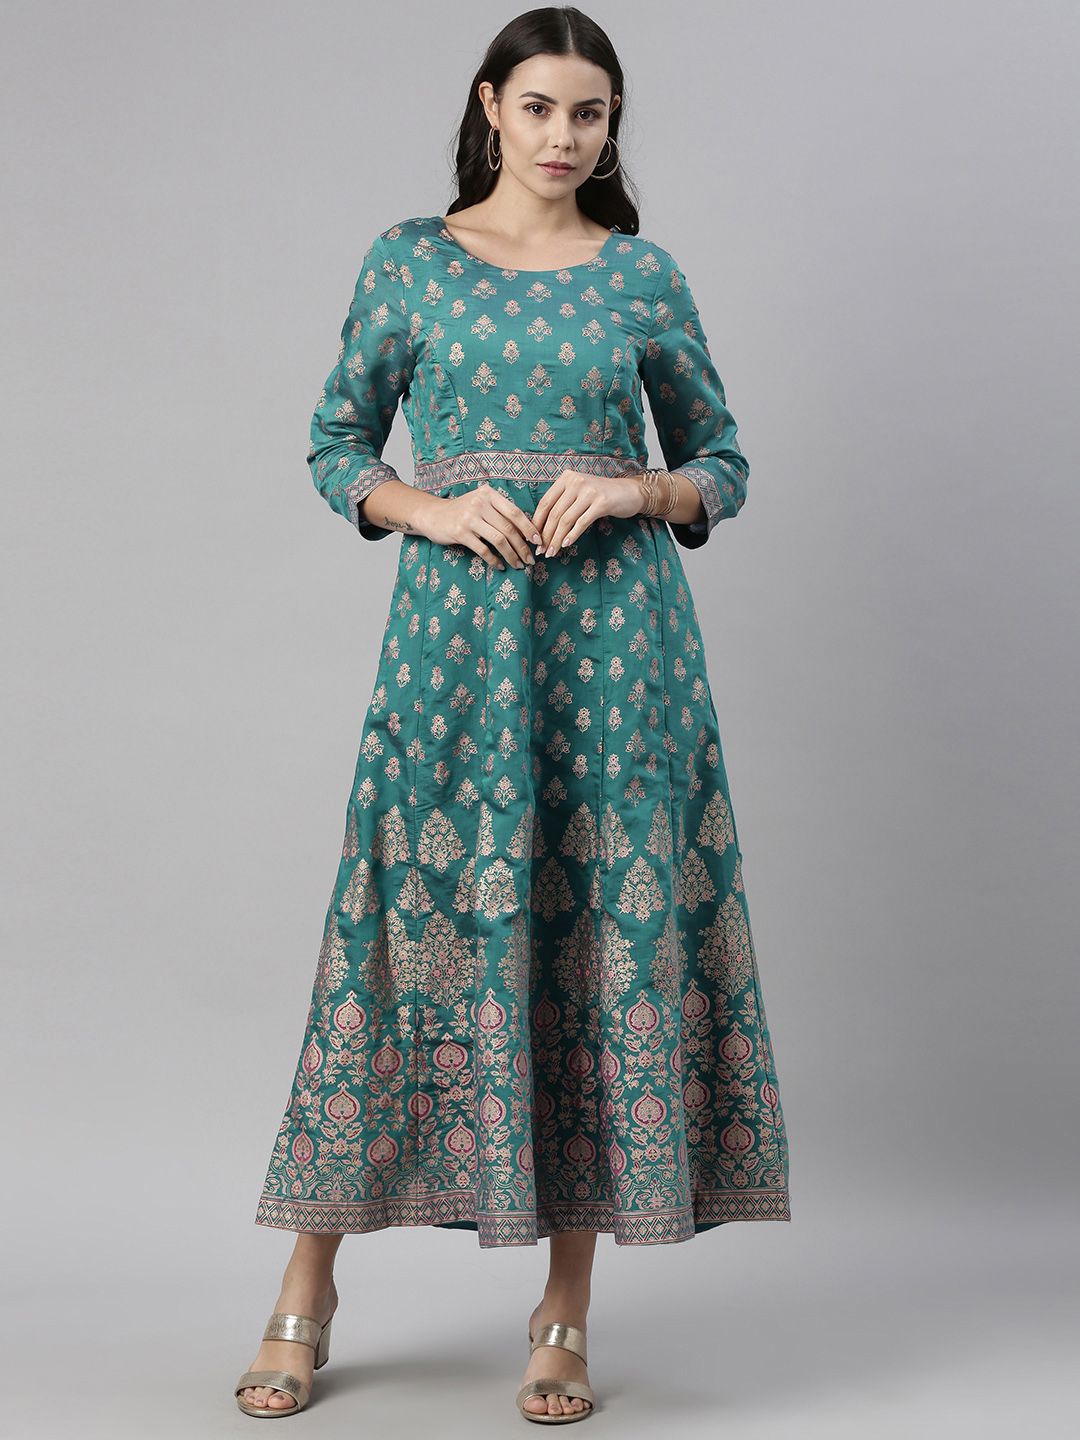 Global Desi Women Teal Blue Ethnic Motifs Printed Fit And Flare Midi Dress Price in India